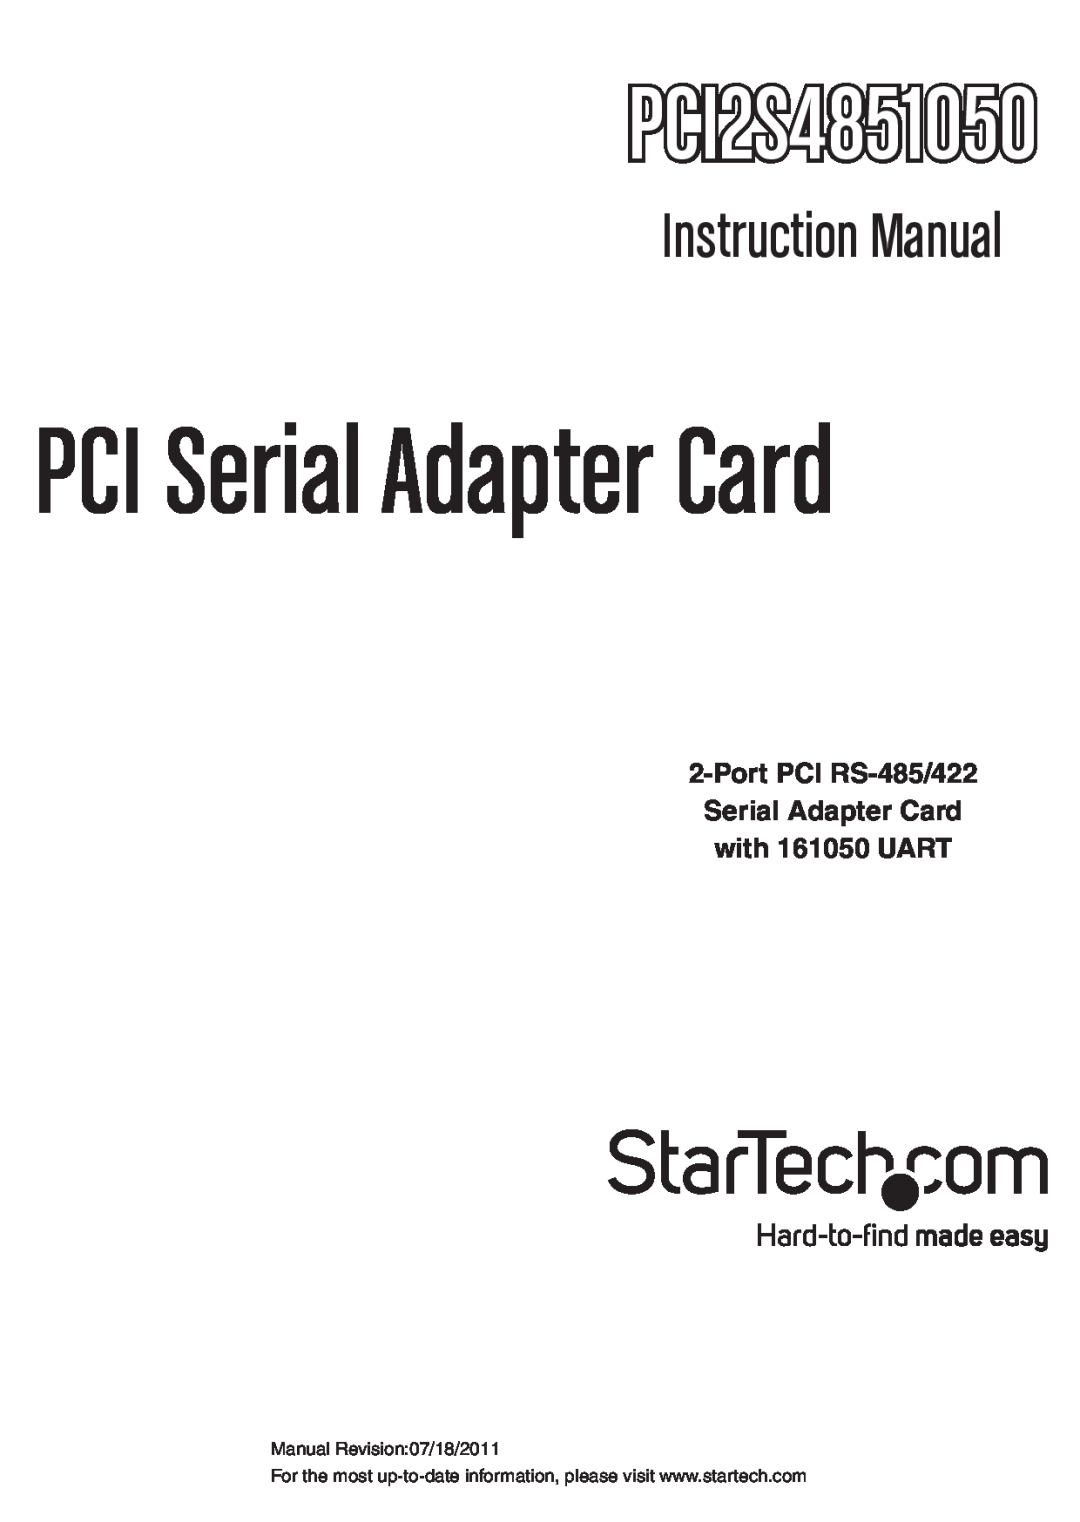 StarTech.com instruction manual Port PCI RS-485/422 Serial Adapter Card with 161050 UART, PCI2S4851050 